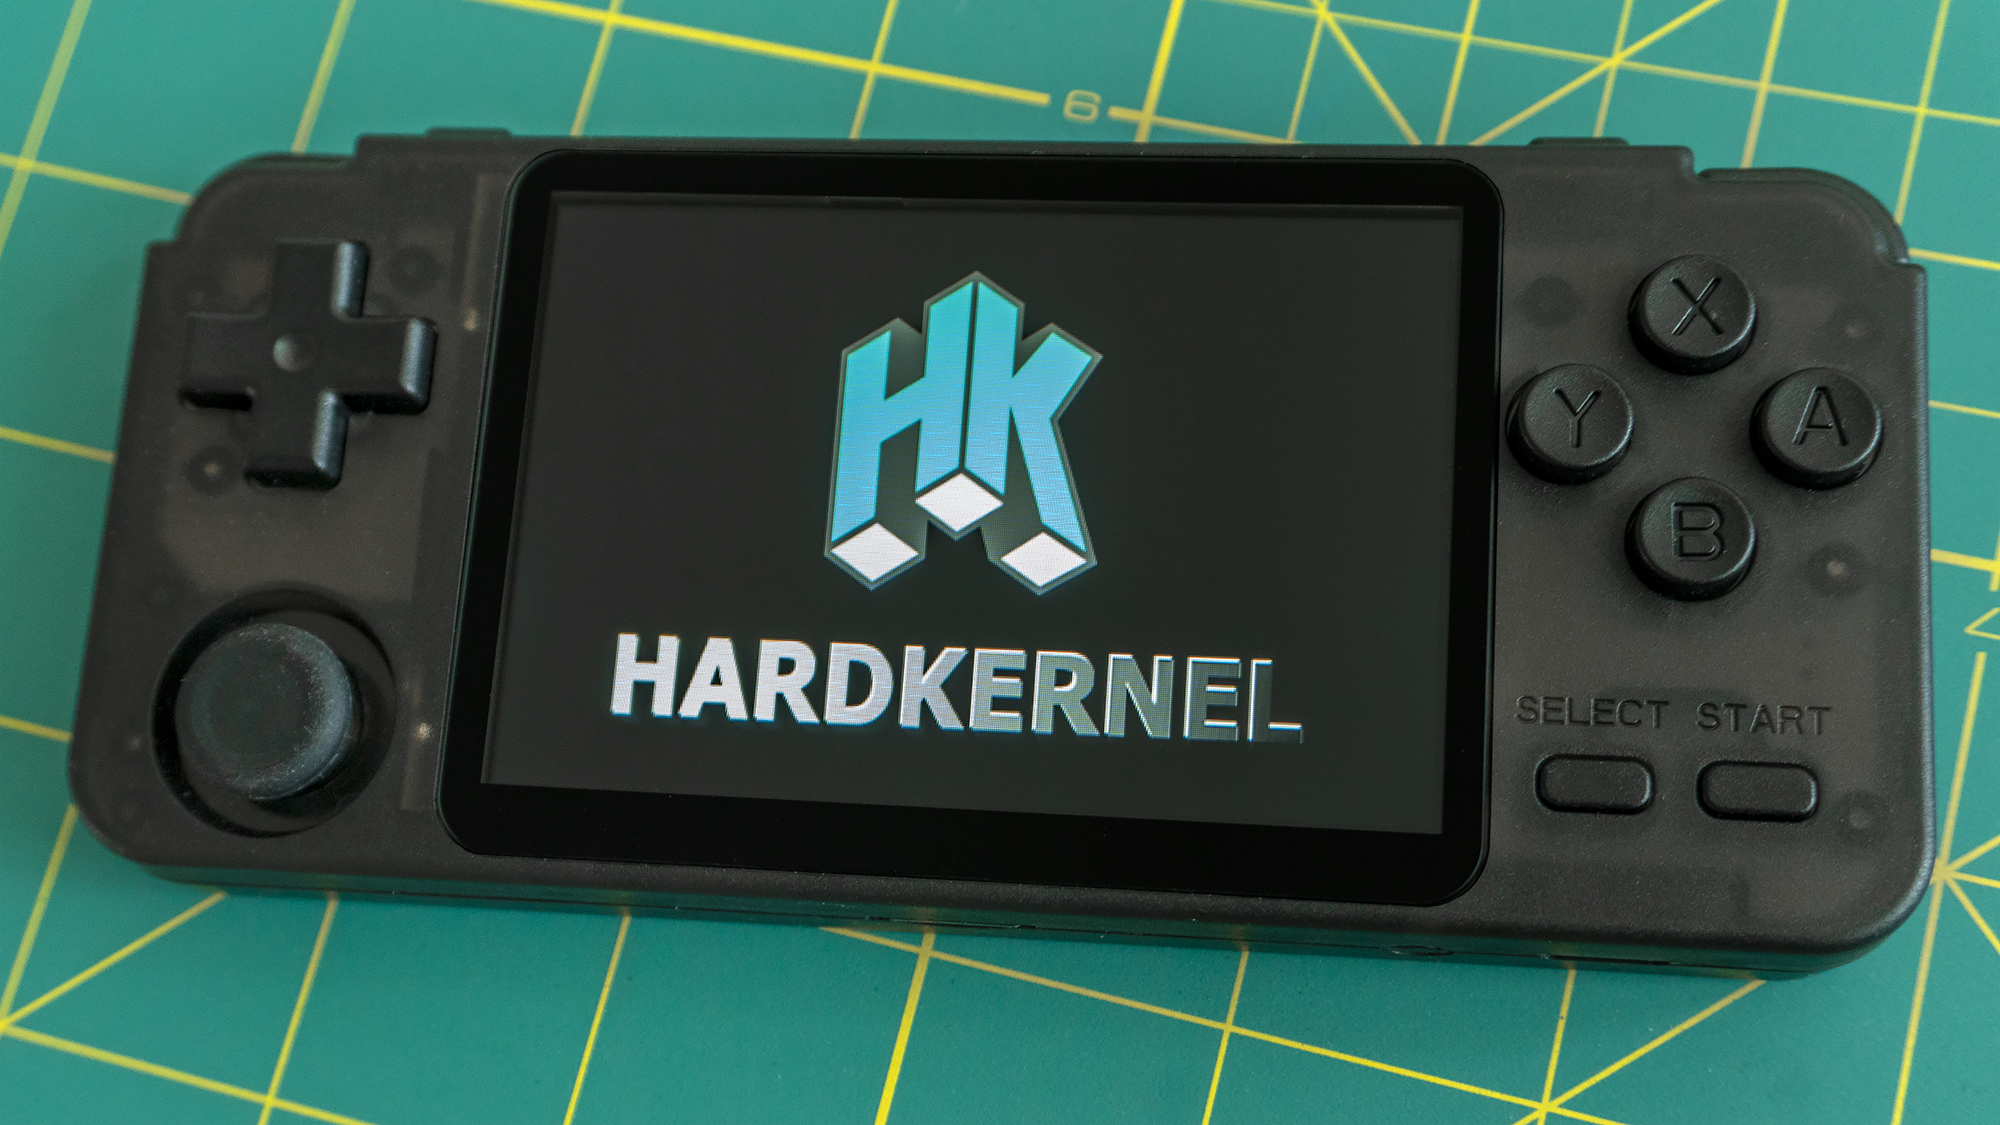 The RK2020 sample we were sent included the Hardkernel firmware developed for the ODROID GO Advance. (Photo: Andrew Liszewski - Gizmodo)